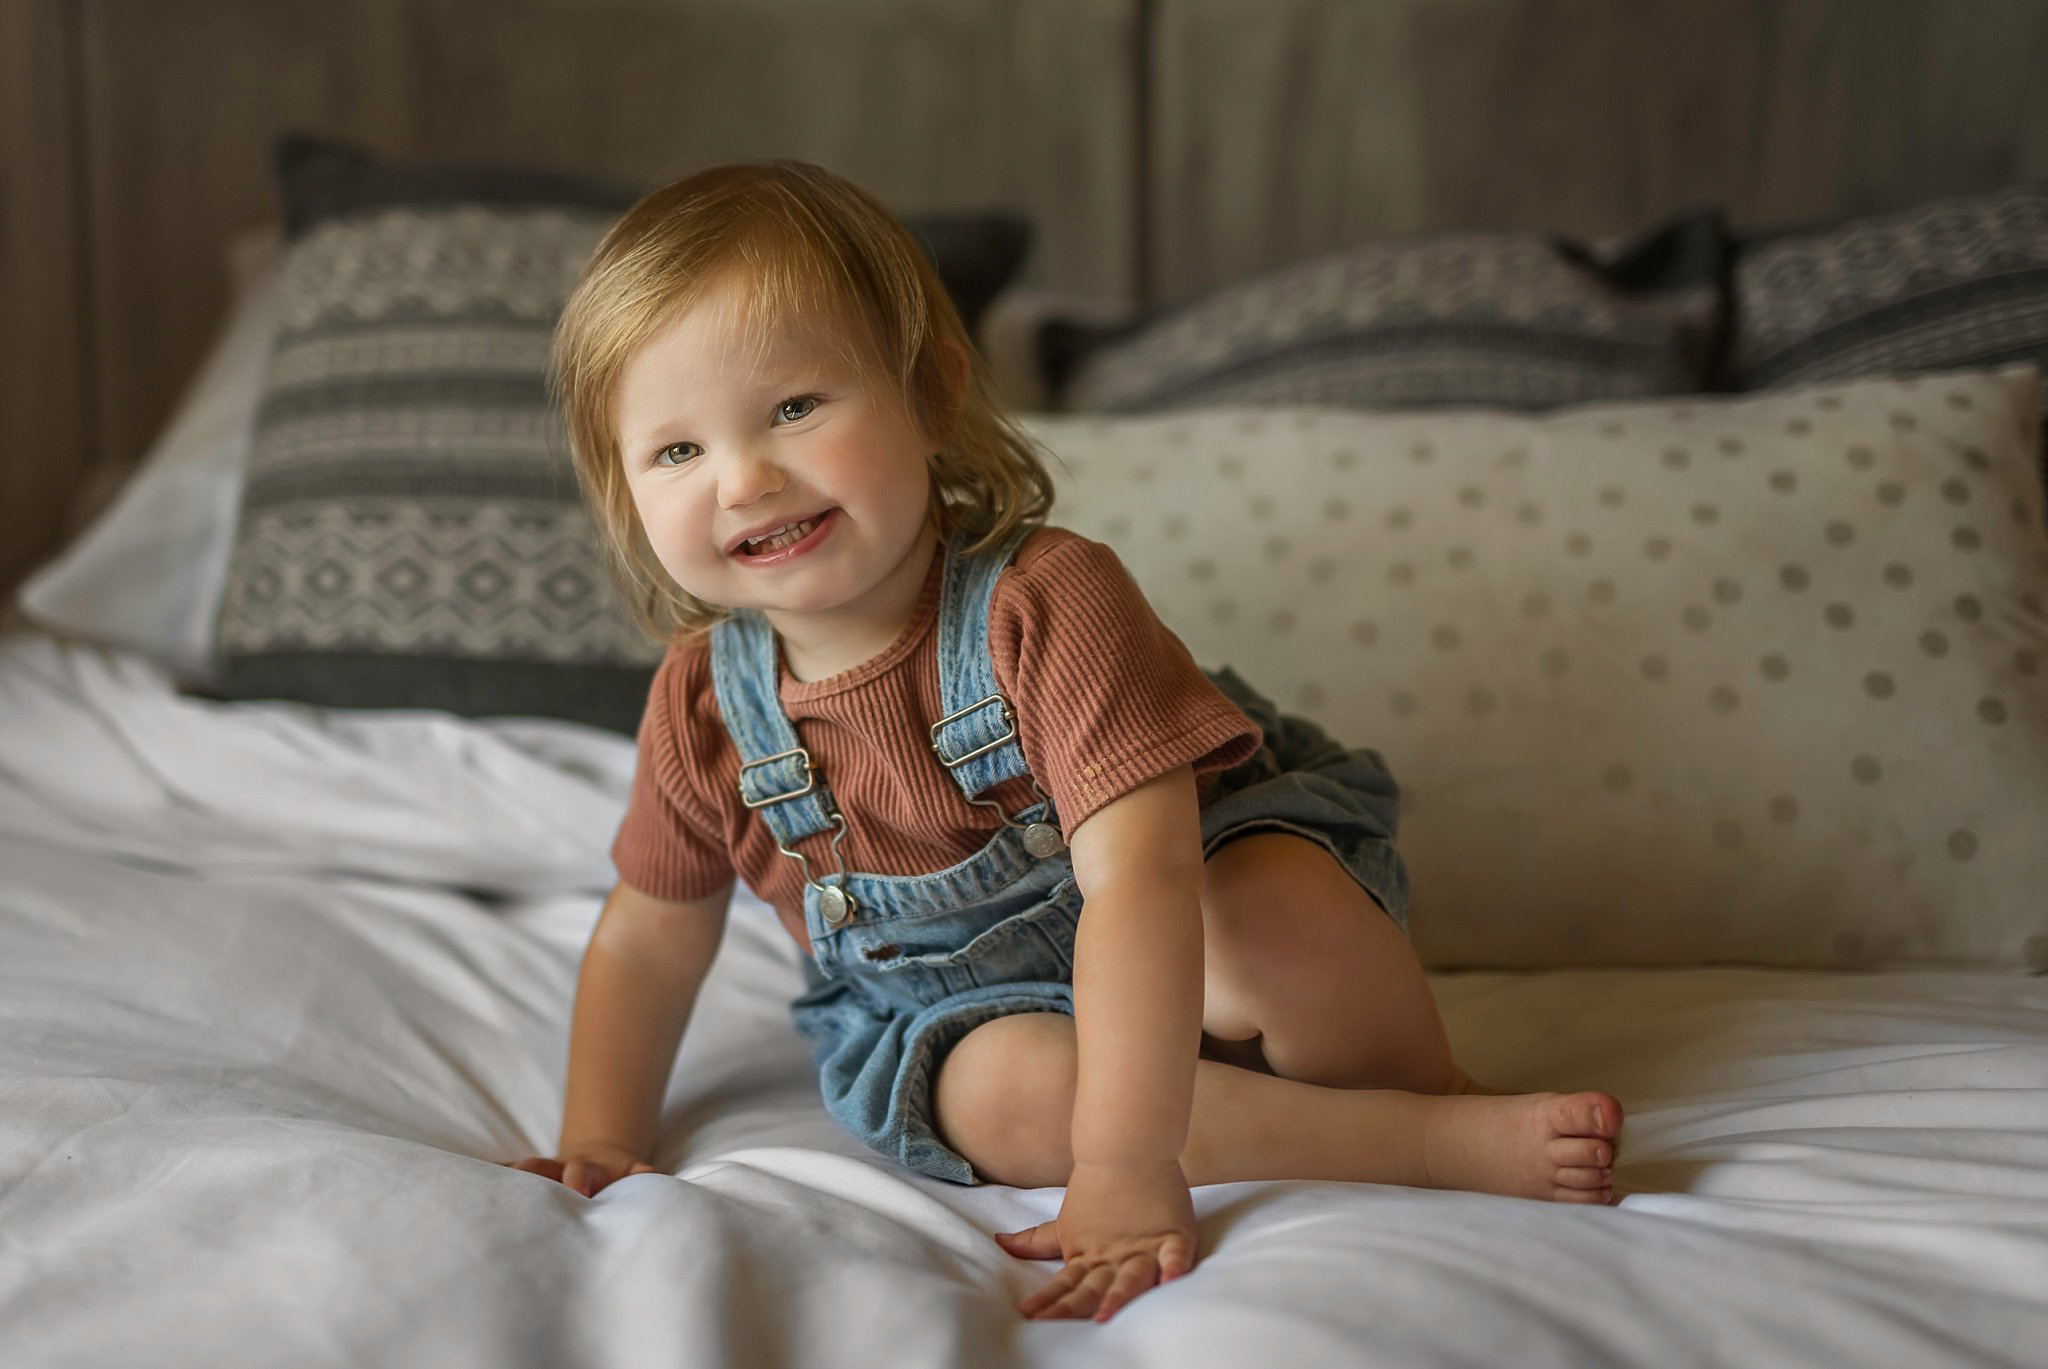 Little girl smiling on a bed